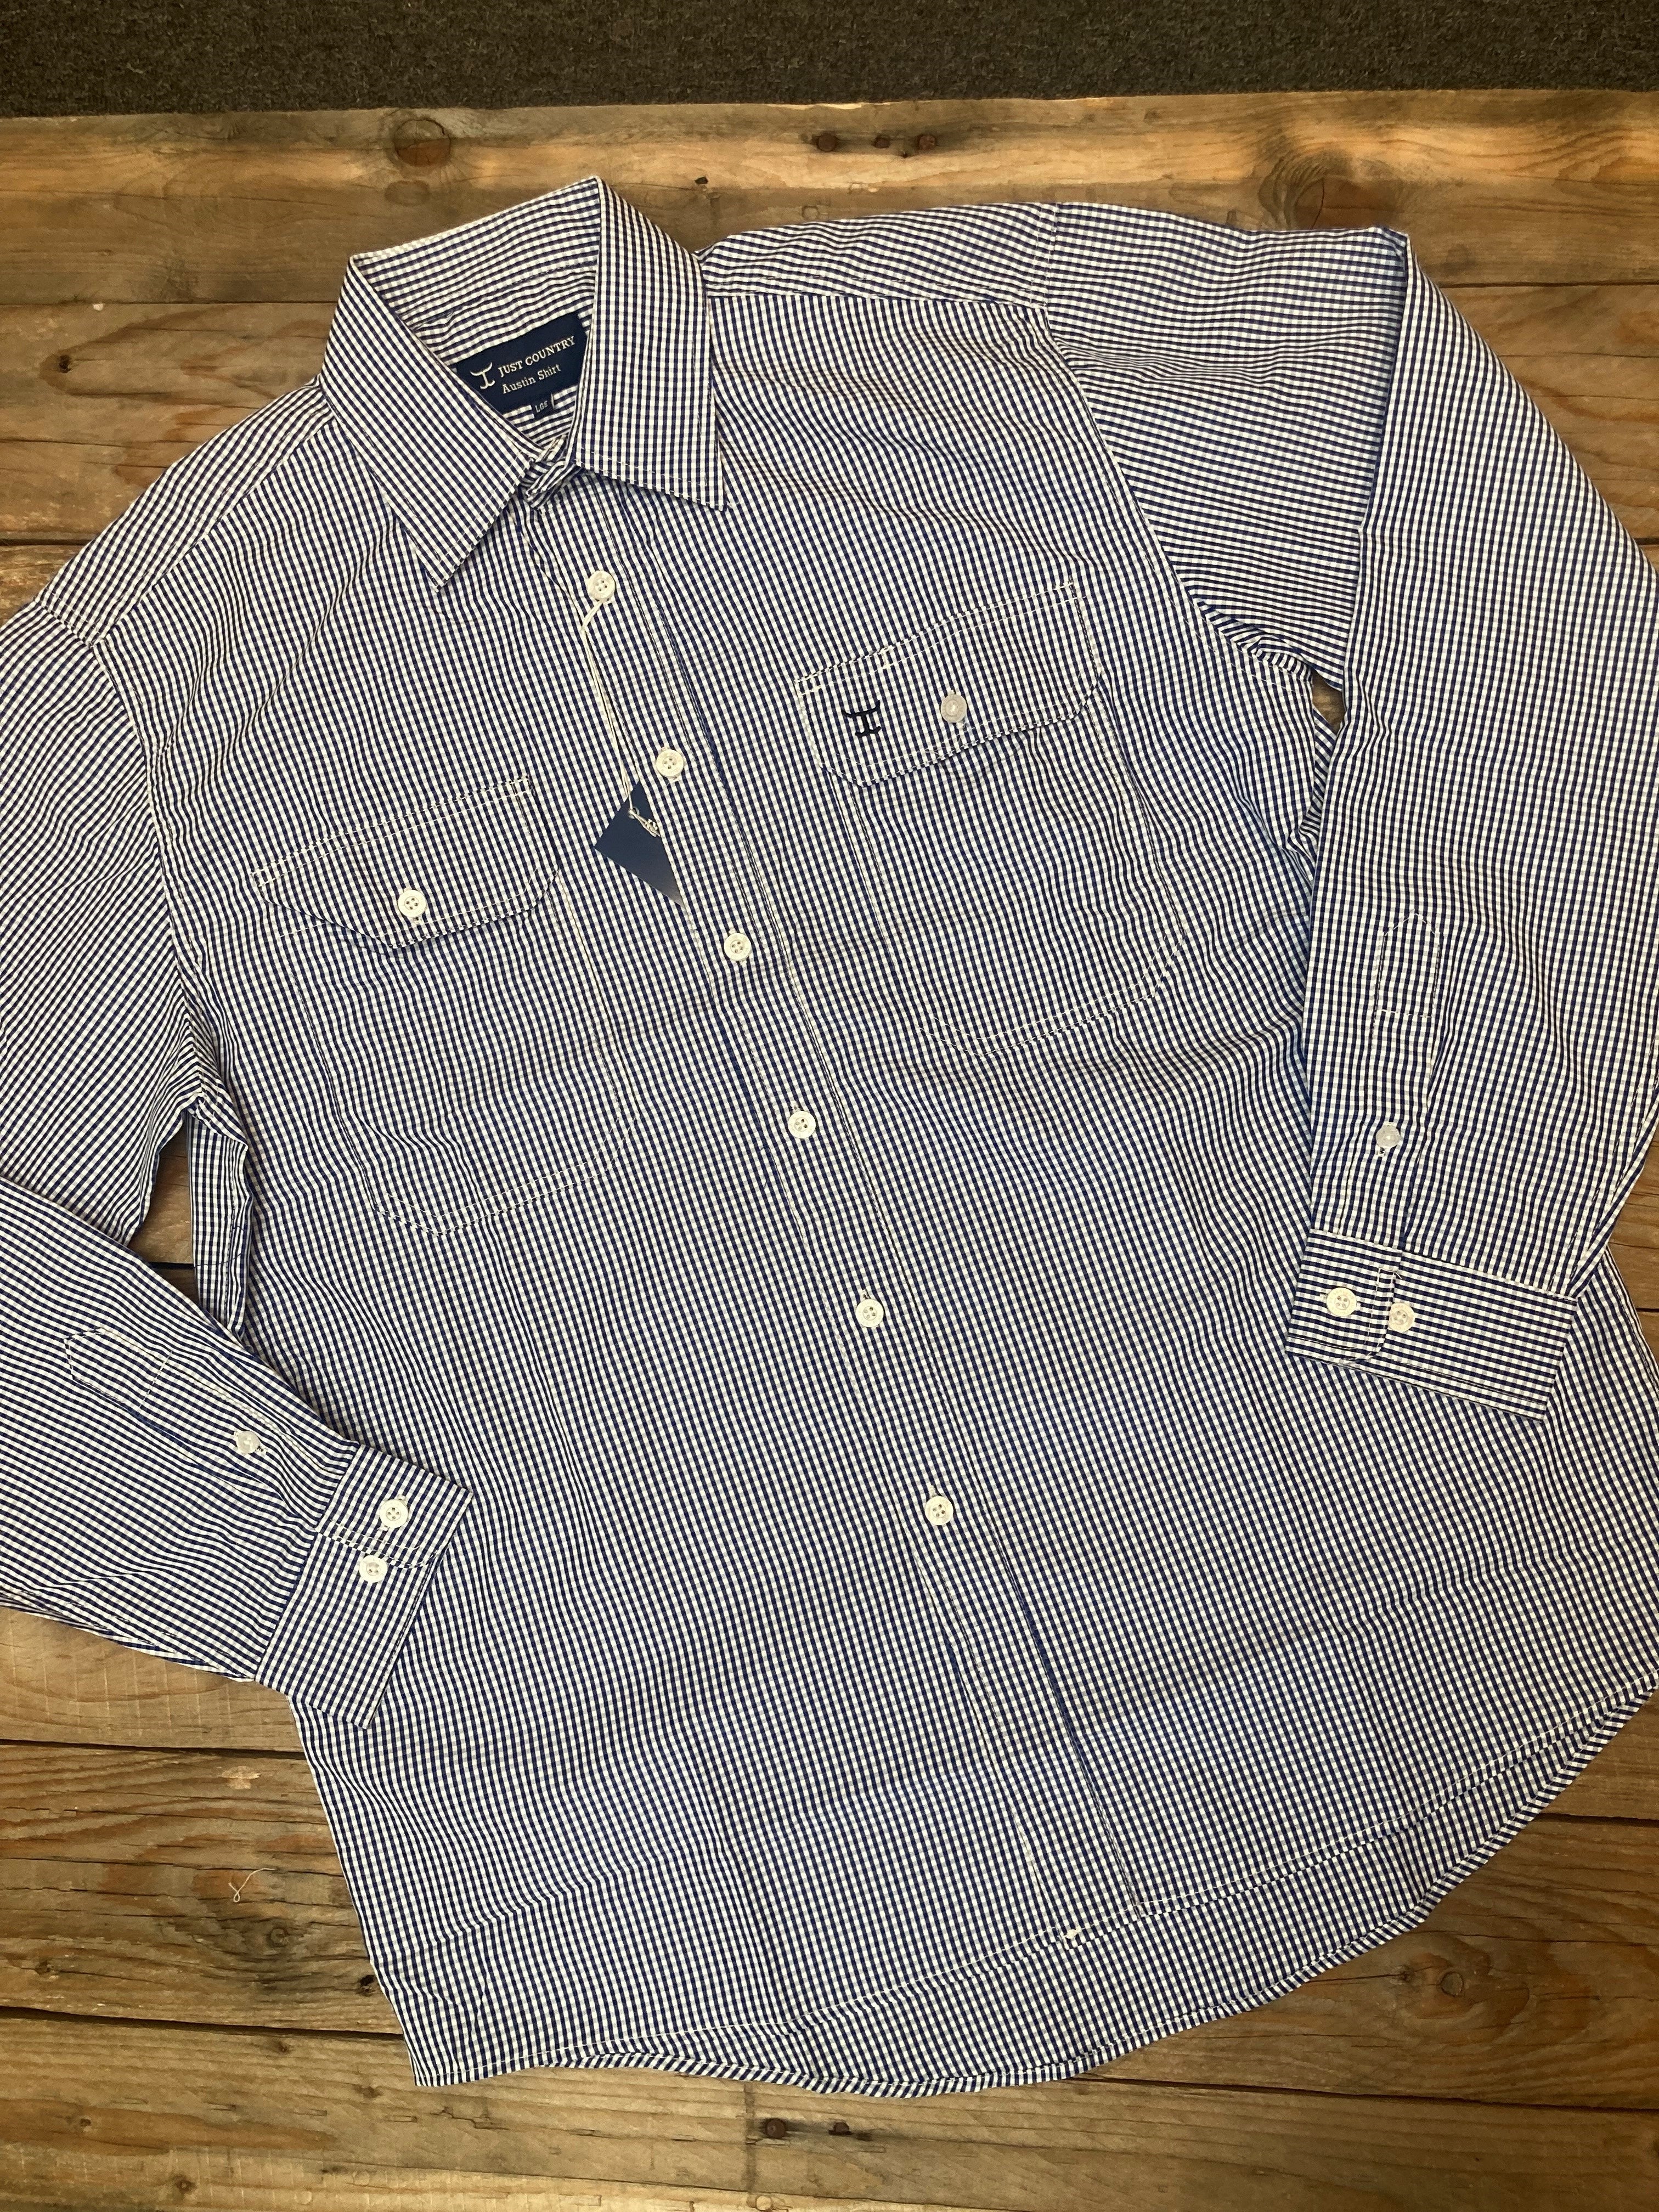 Mens Just Country Austin Full Button Workshirt - Navy or Cobalt / White Mini Check (6859776426061)